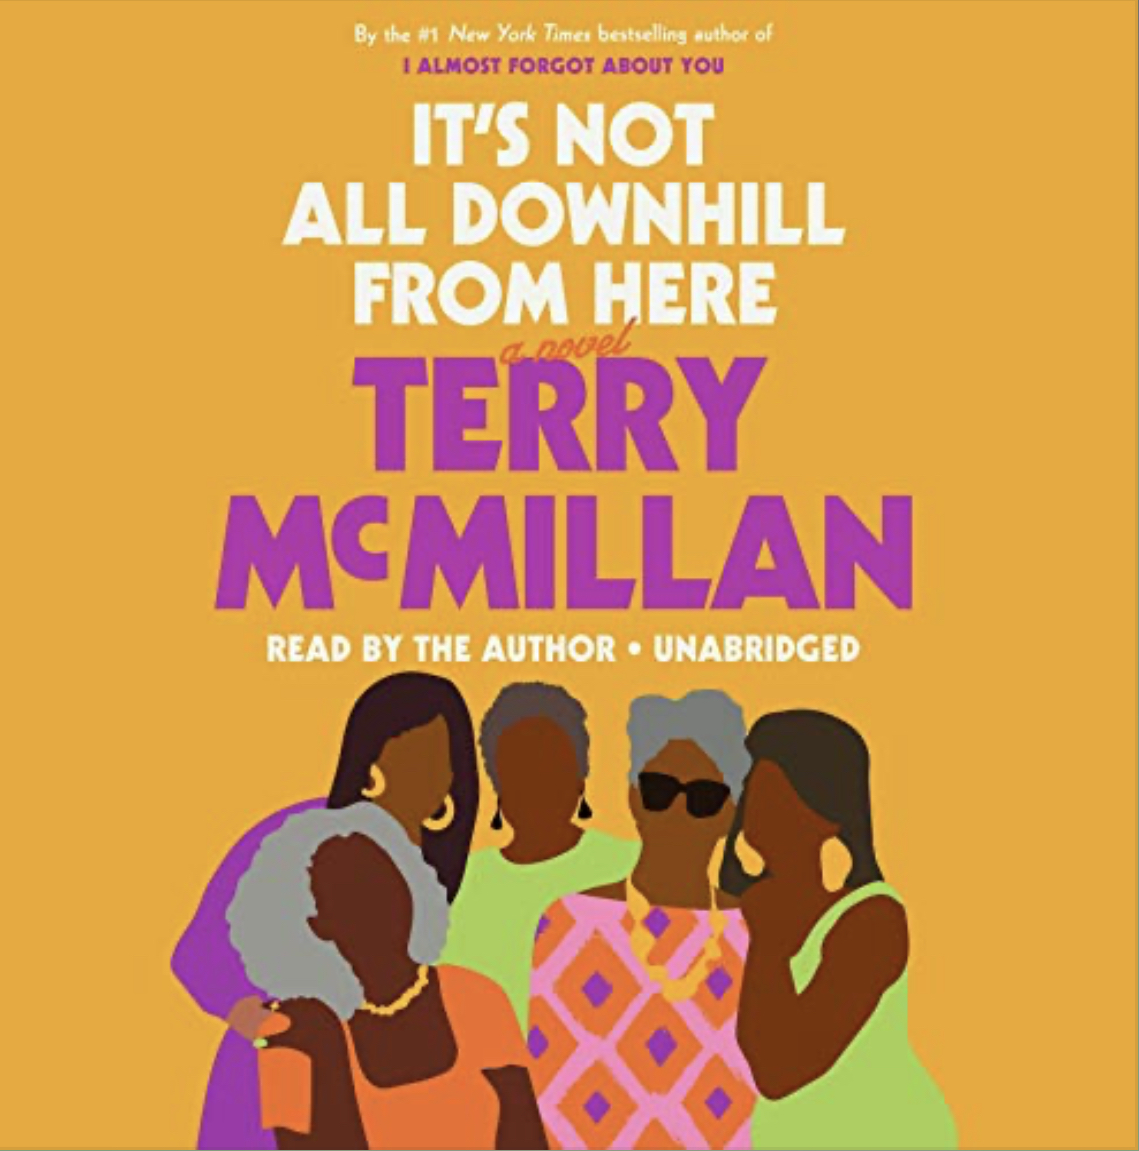 Terry McMillian’s latest book review